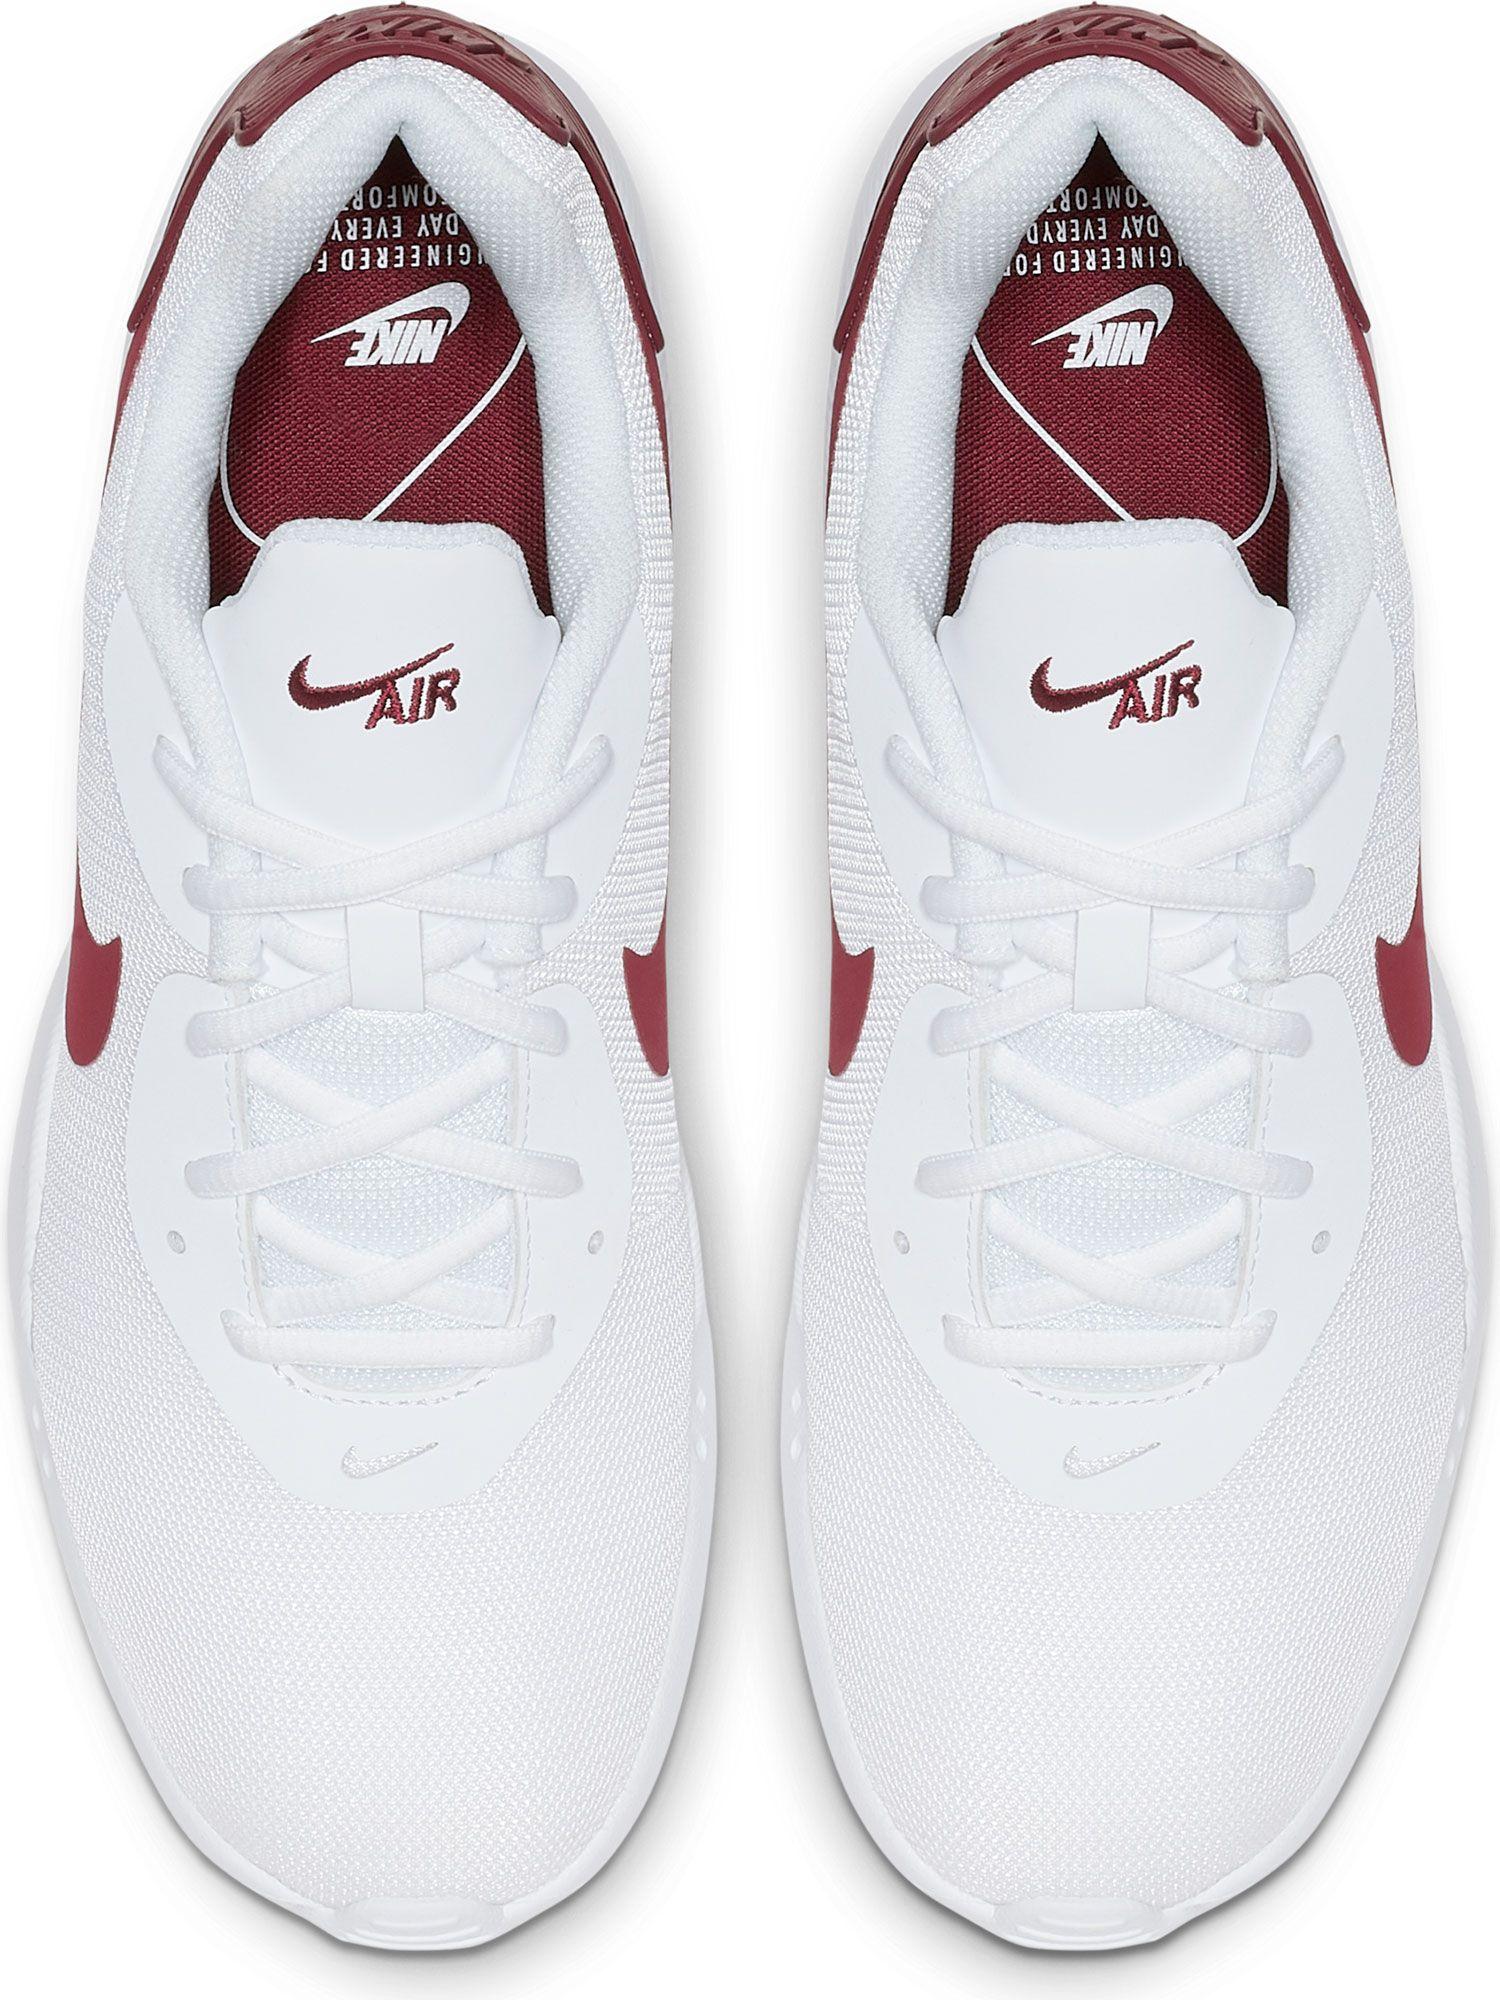 Nike Synthetic Air Max Oketo Shoe in White/Red (White) for Men - Lyst